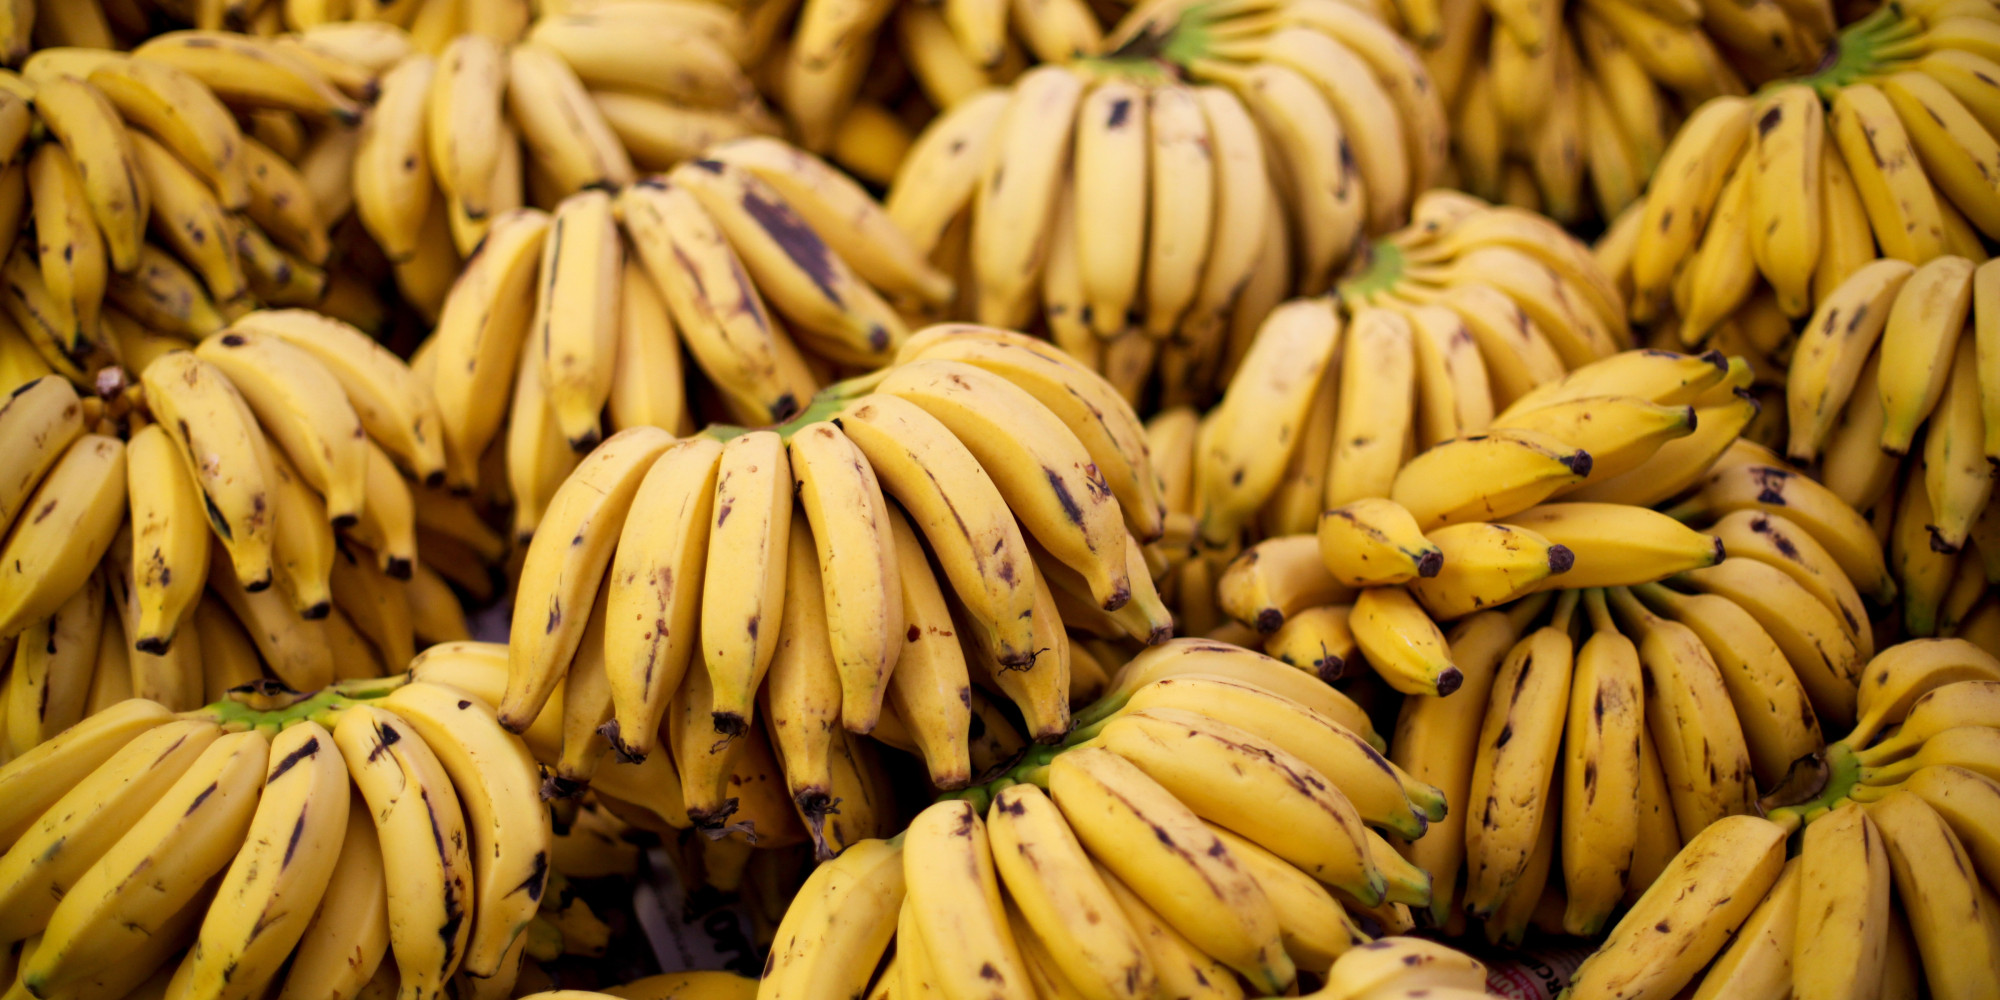 Buy research papers online cheap why bananas are really good